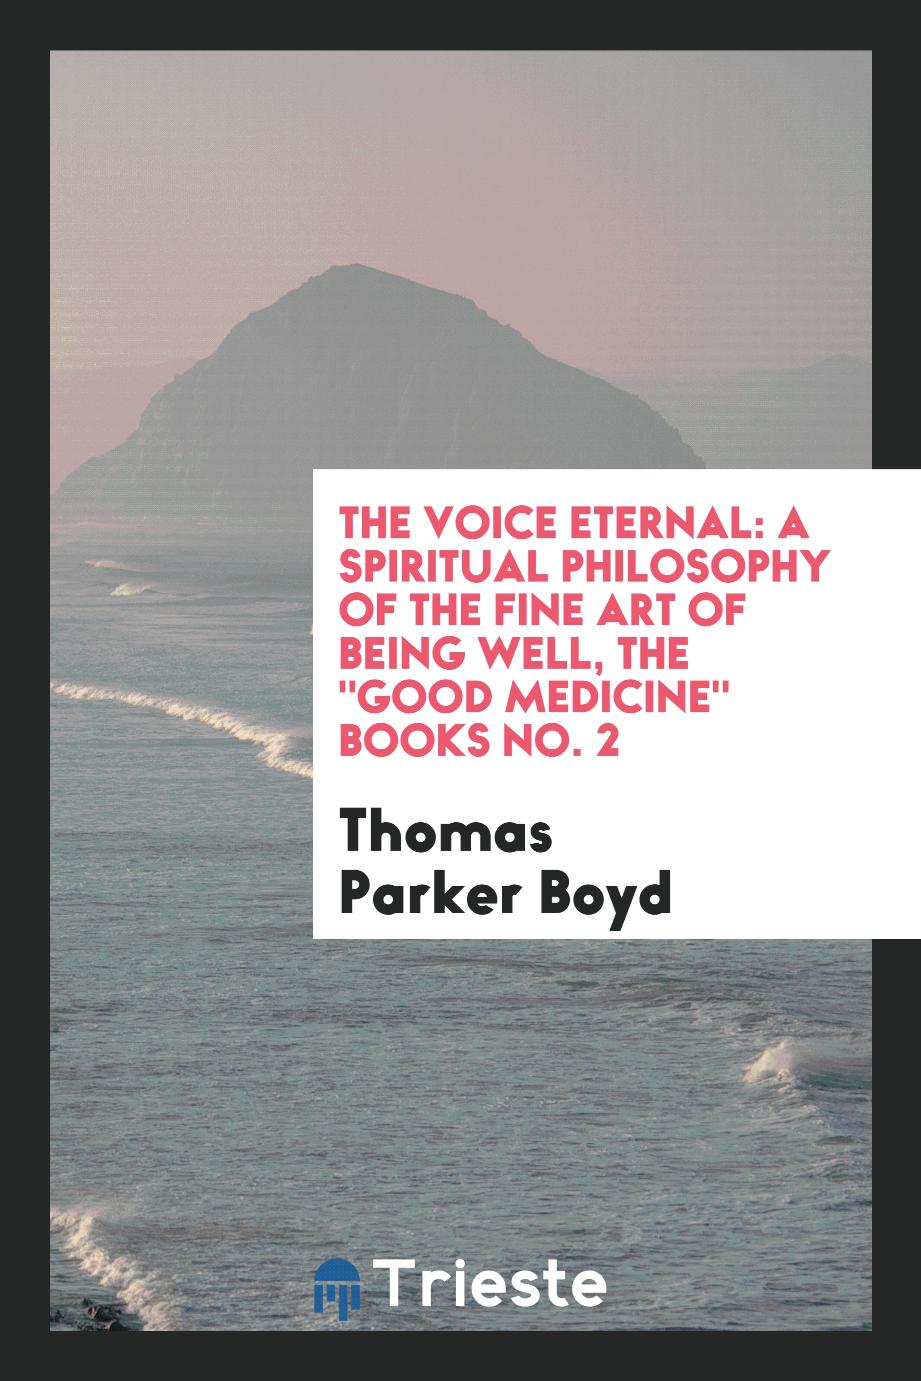 The voice eternal: a spiritual philosophy of the fine art of being well, the "good medicine" books No. 2